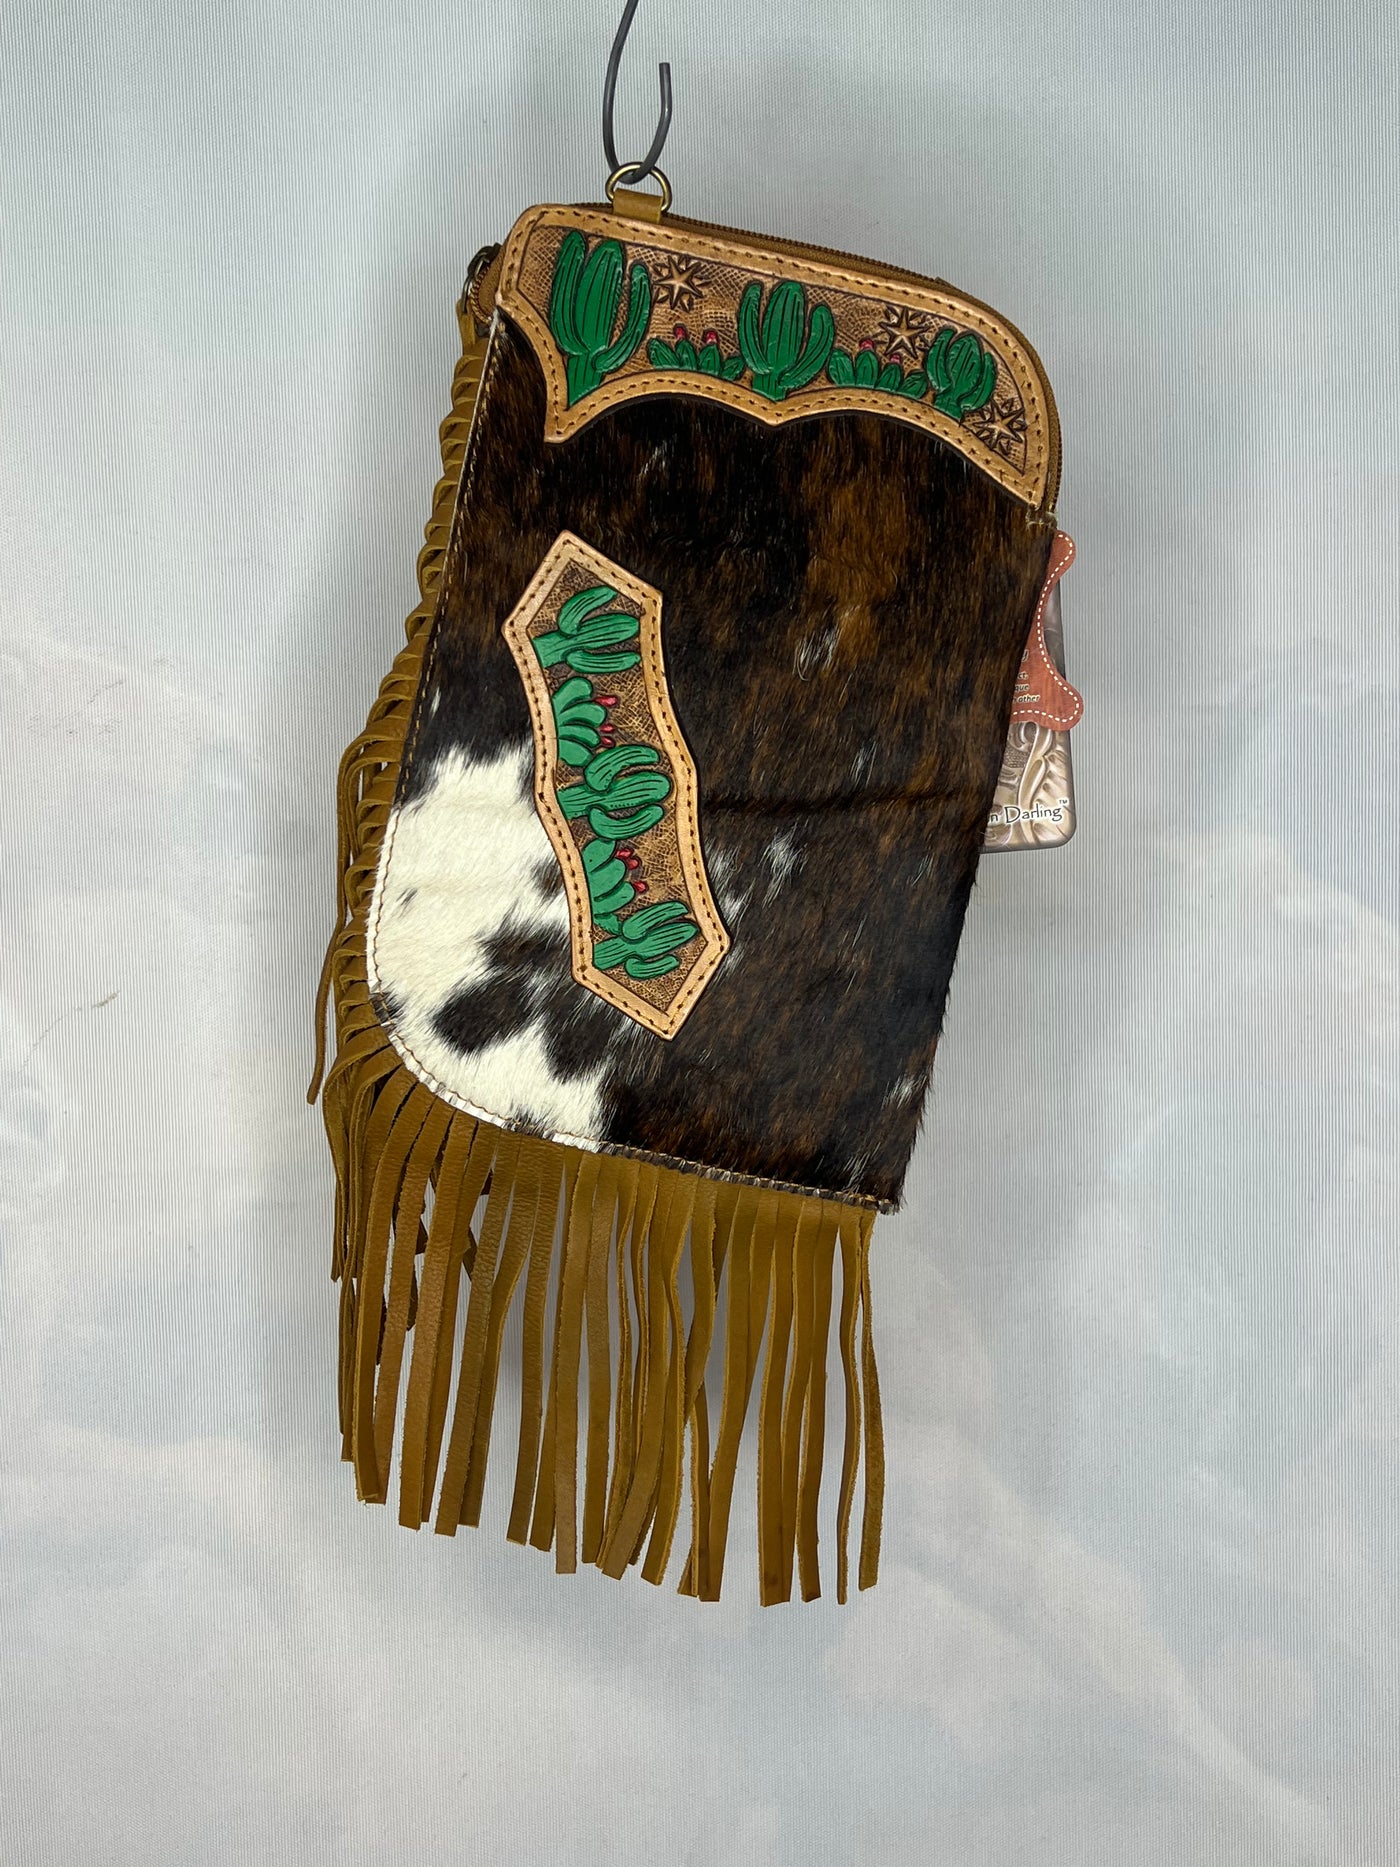 American Darling Cowhide Purse w/Painted Cactus Leather Patch